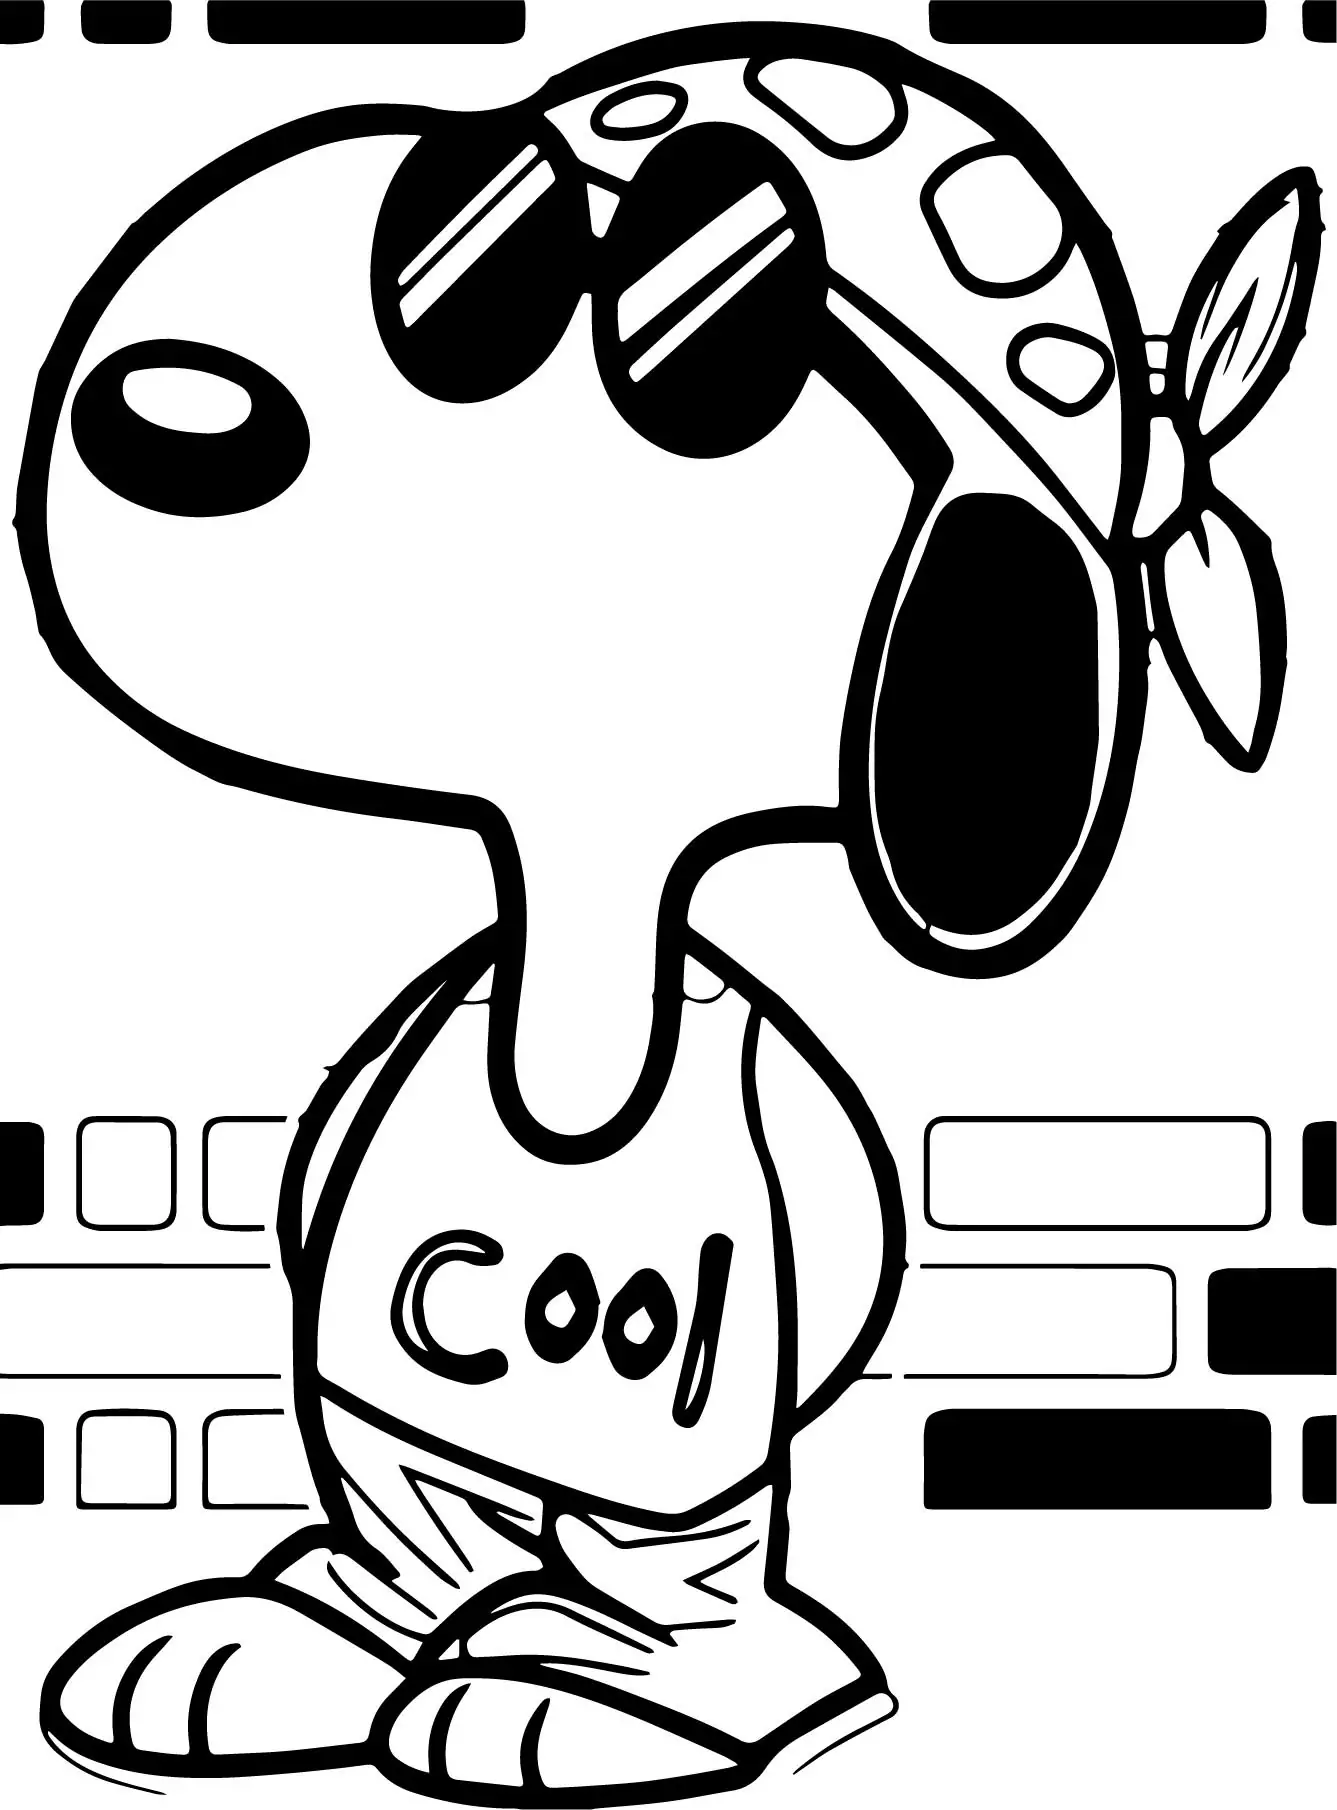 Snoopy Coolest Style